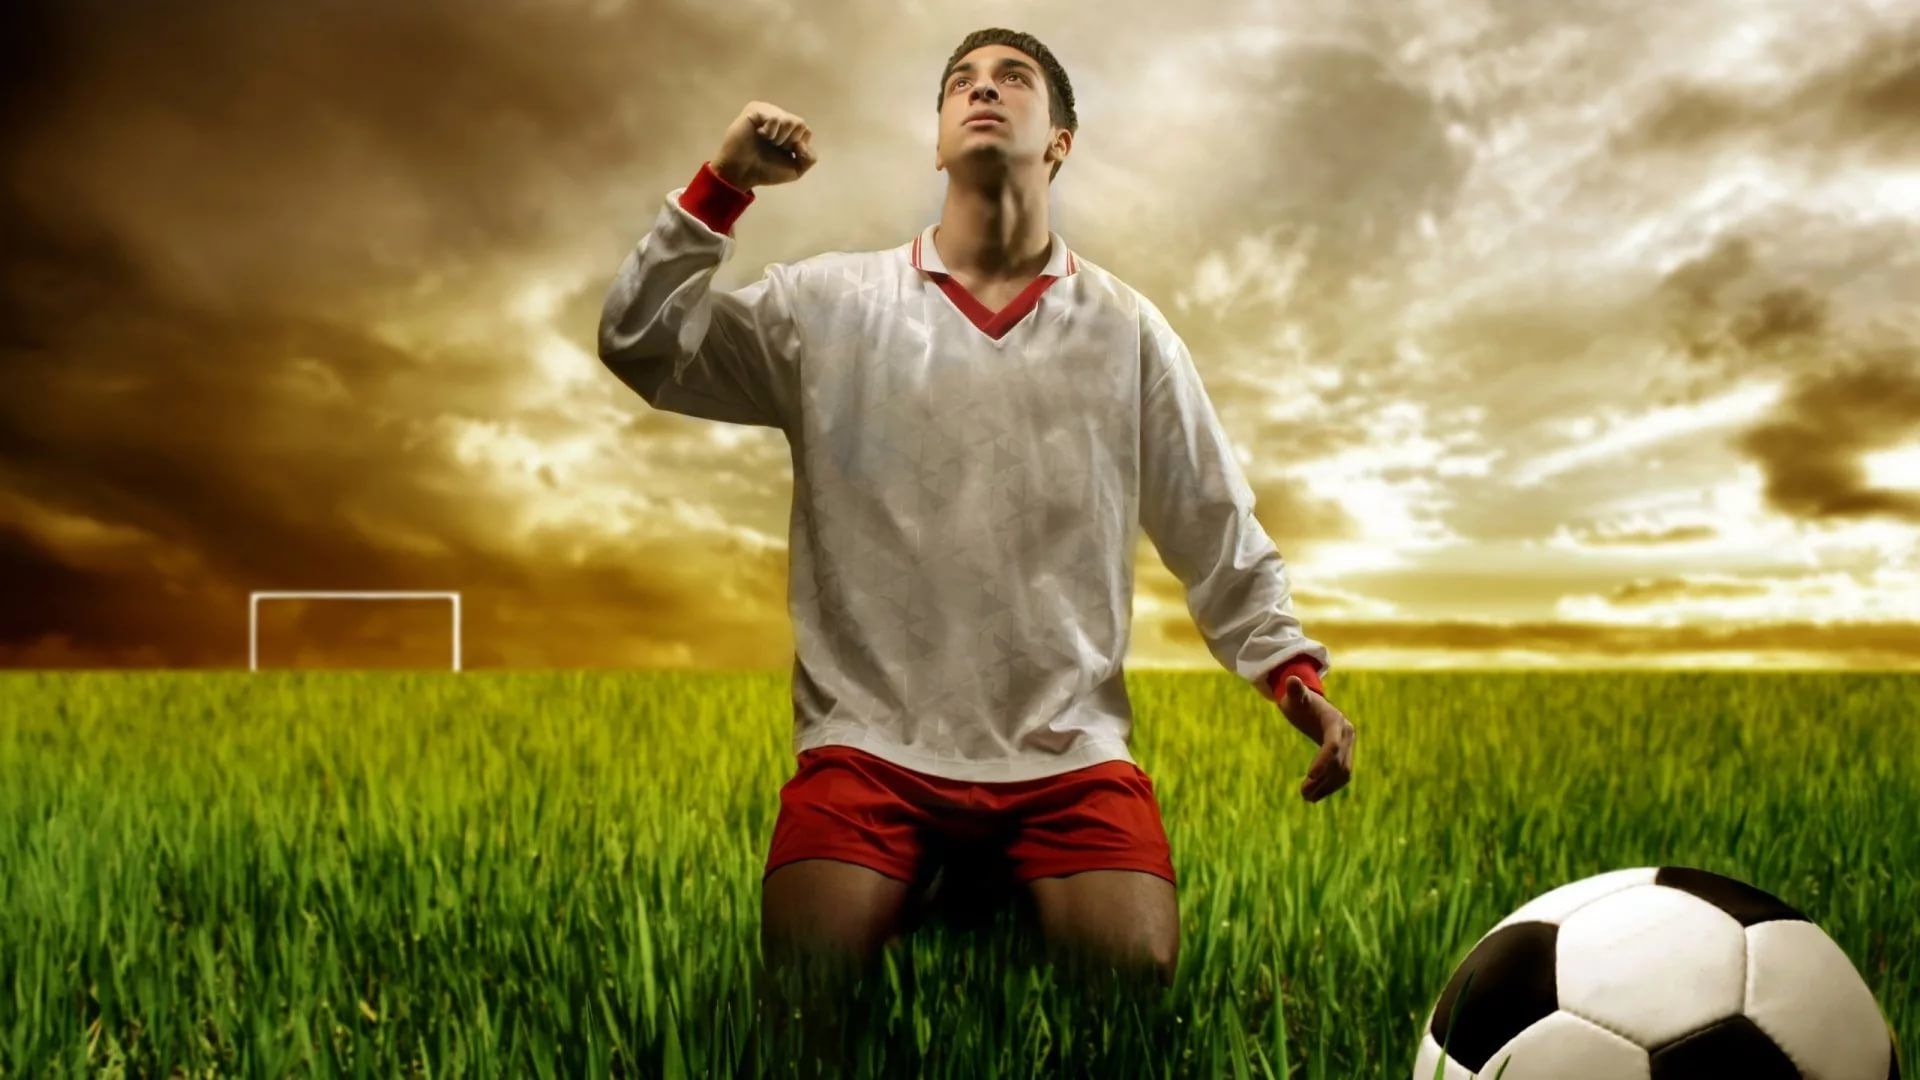 Soccer Player wallpaper and themes